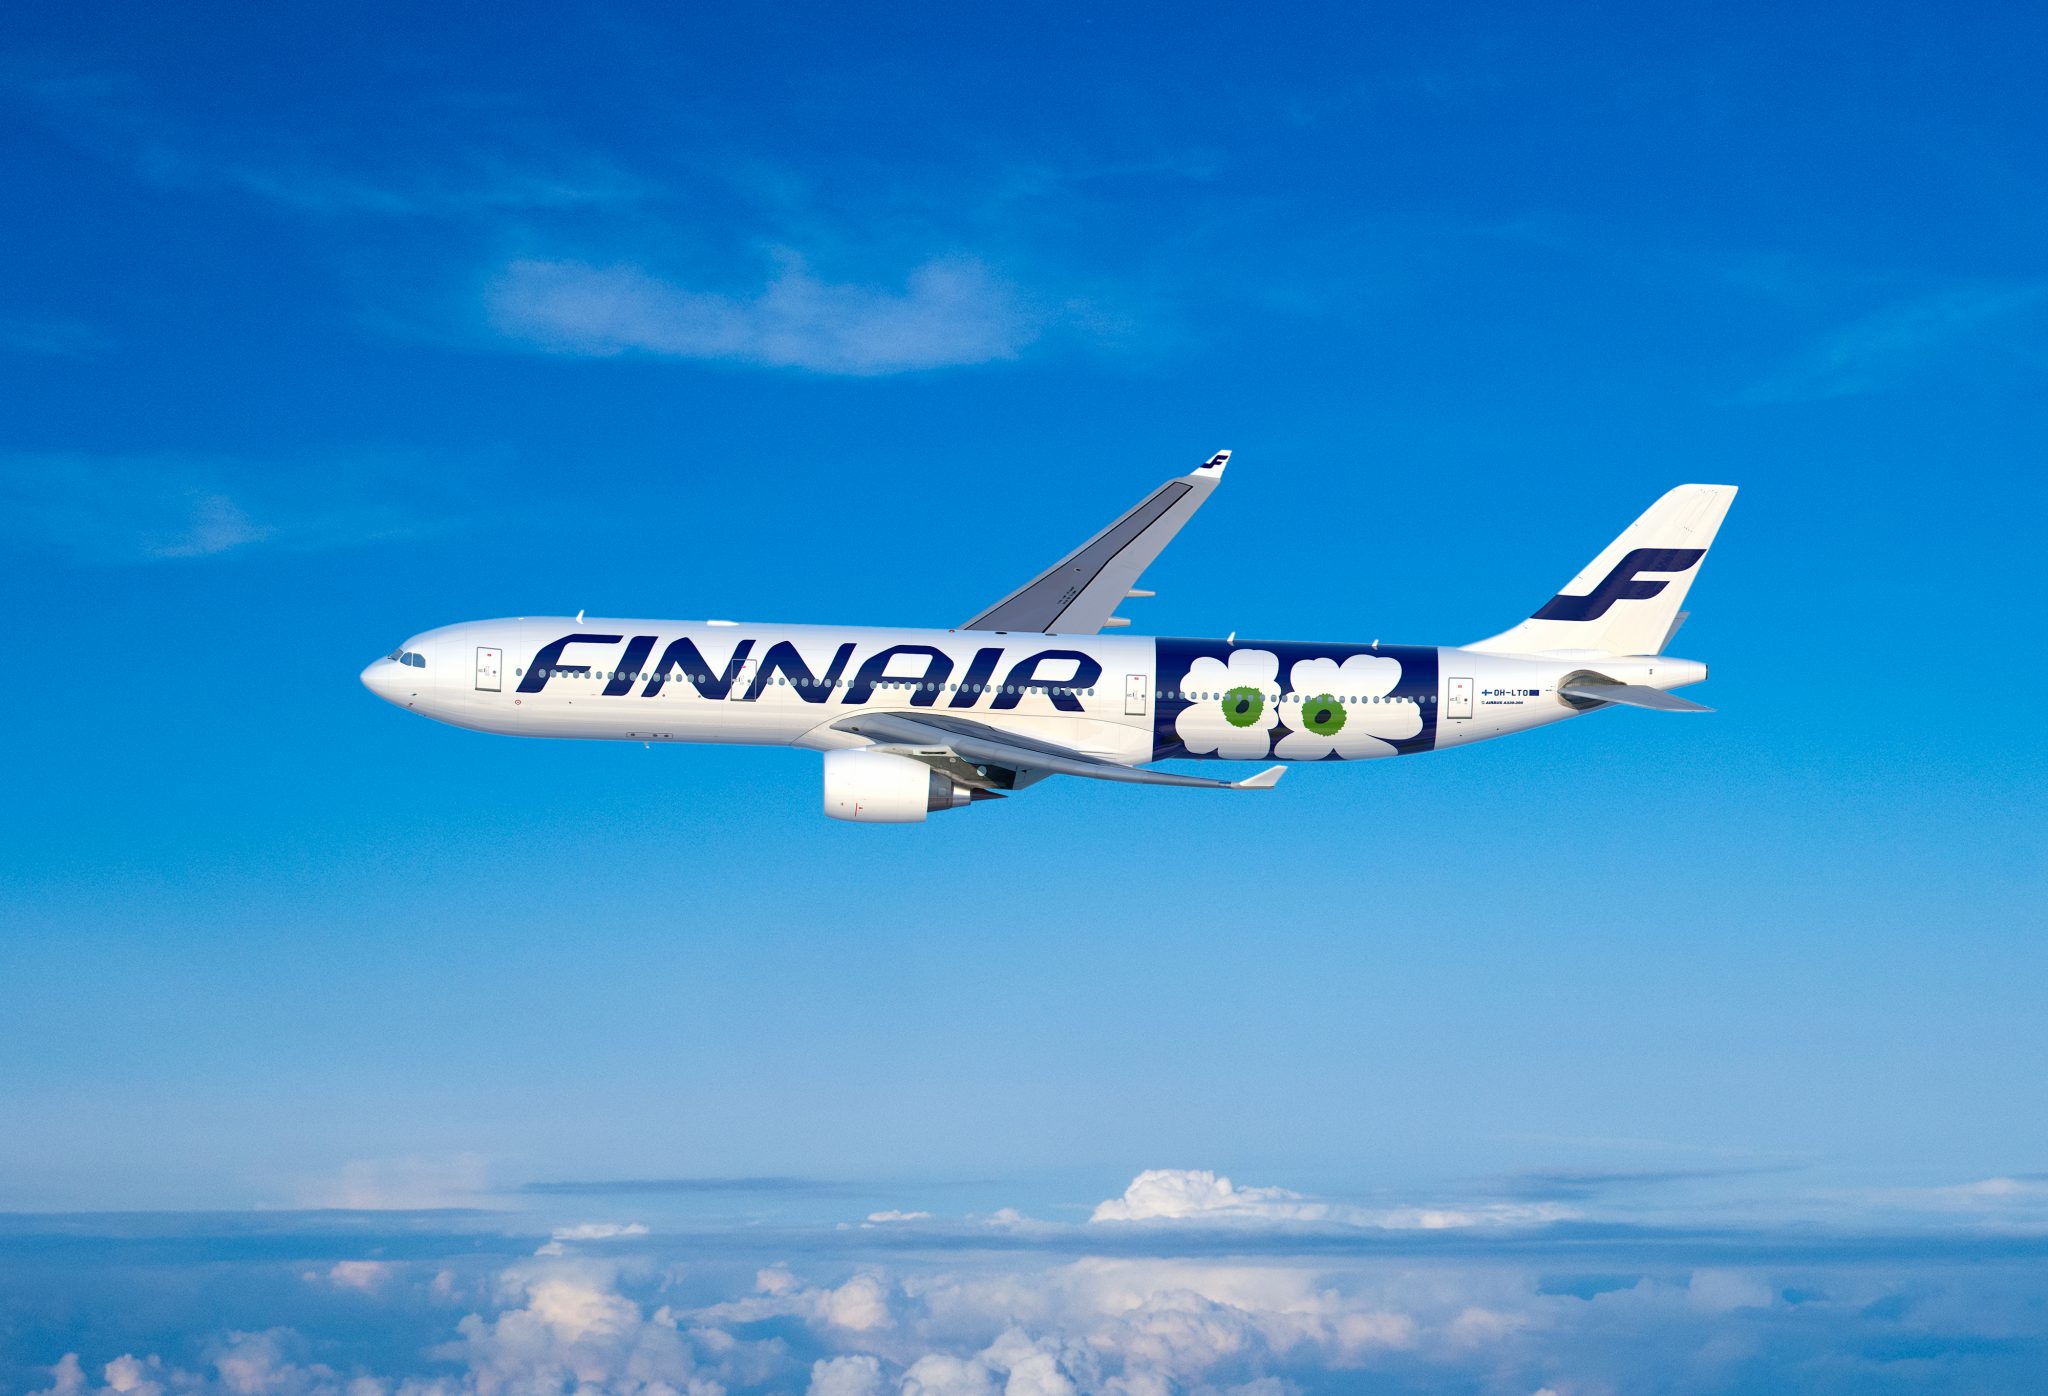 Finnair resumes operation to Nanjing for September and October with a weekly frequency